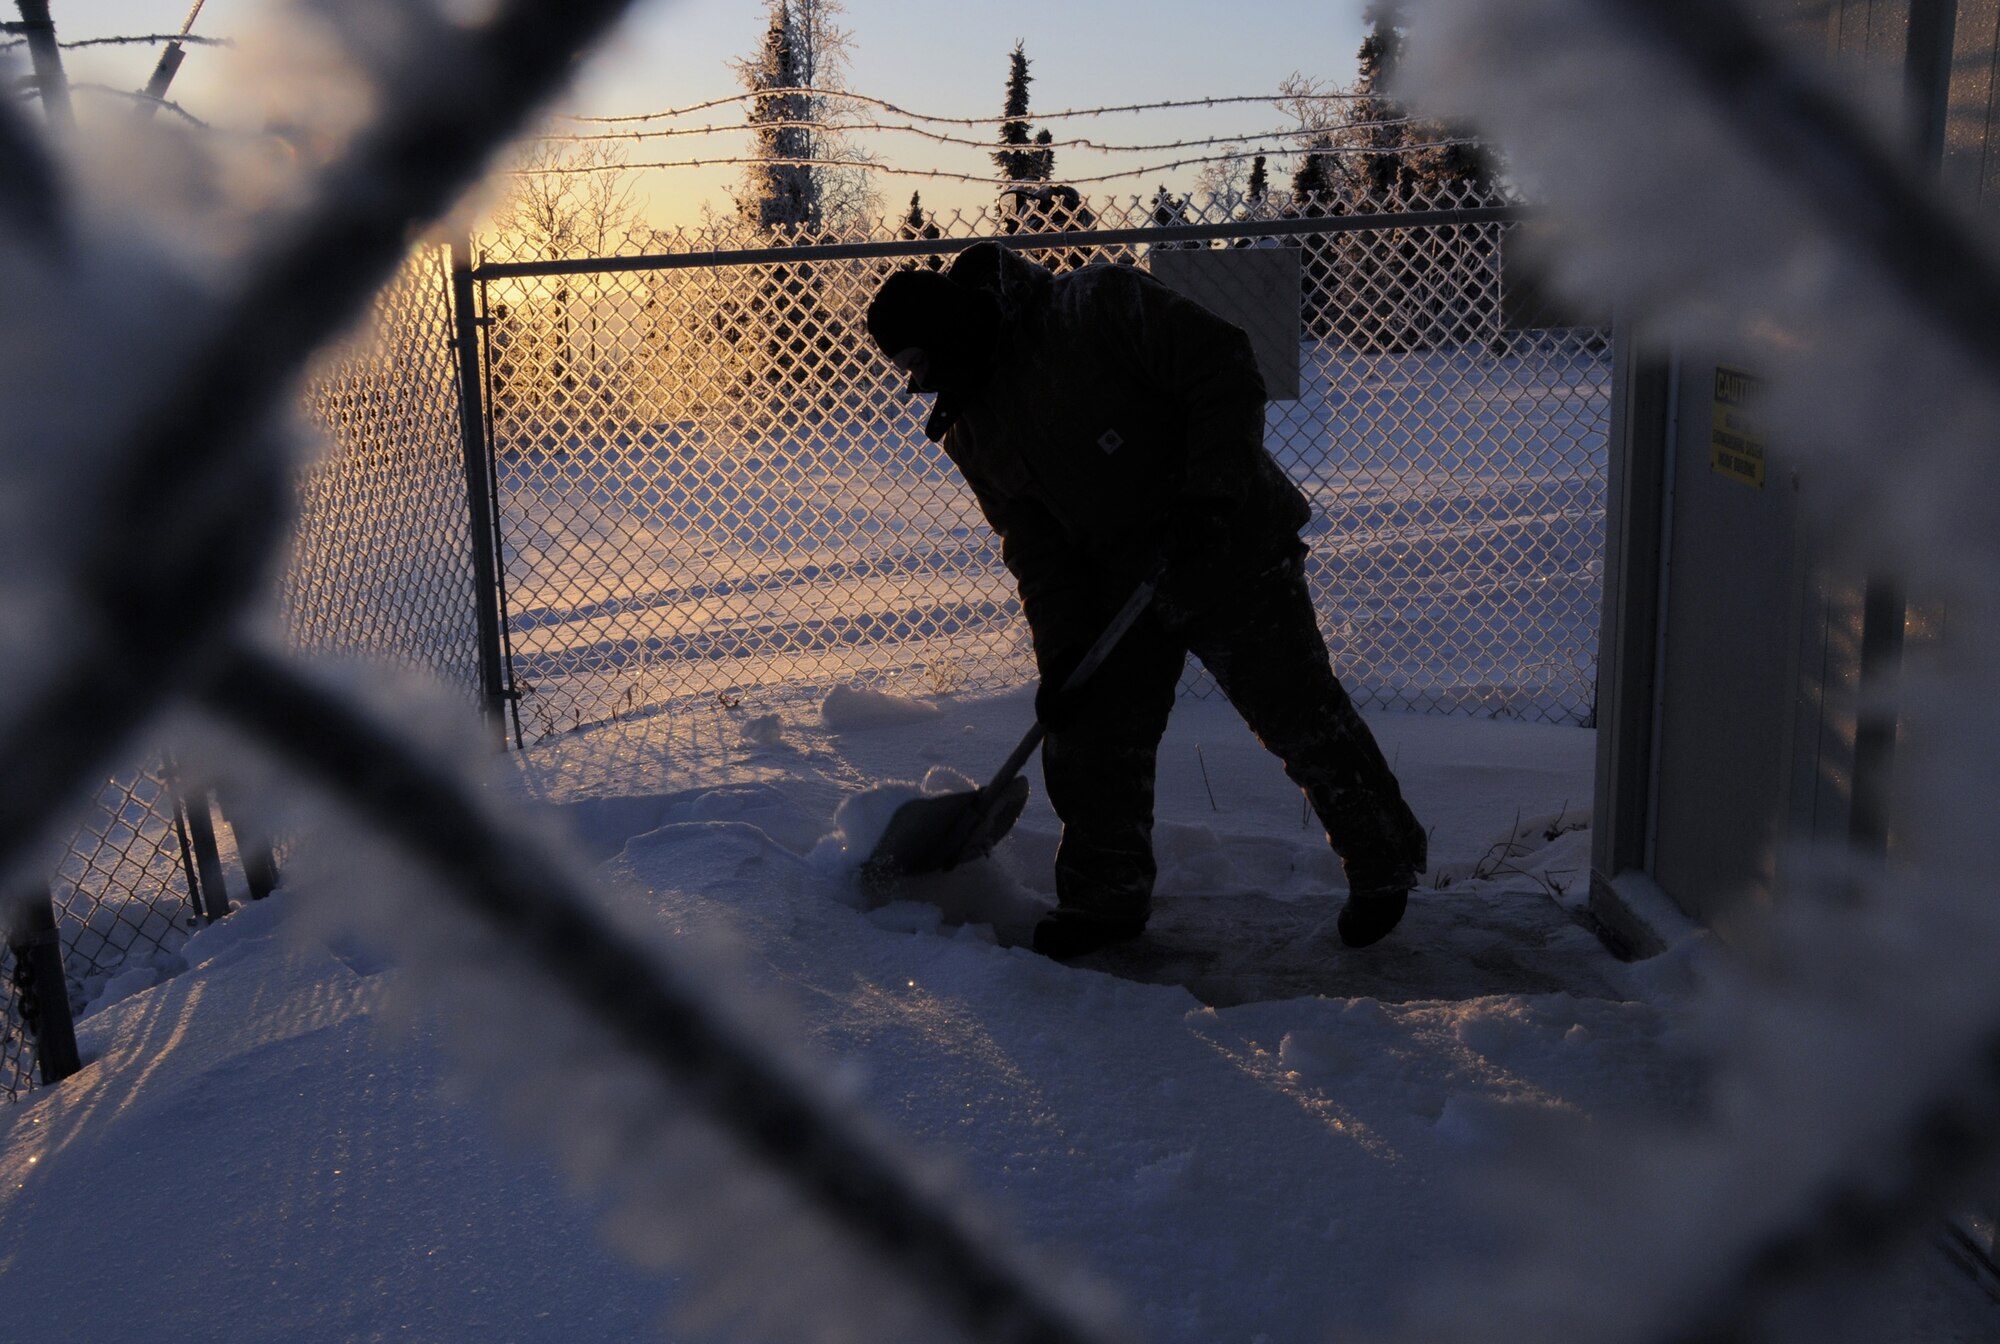 Maj. Anthony Deluca clears a pathway to an Alaska Long Period Array site Dec. 16, 2008, at a remote operating facility in the Pacific Alaska Range Complex in Alaska. Det. 460 monitors for any underground nuclear seismic activity, atmospheric nuclear radiation and collects ground samples for analysis. Major Deluca is the Det. 460 commander. (U.S. Air Force photo/Airman Laura Max) 